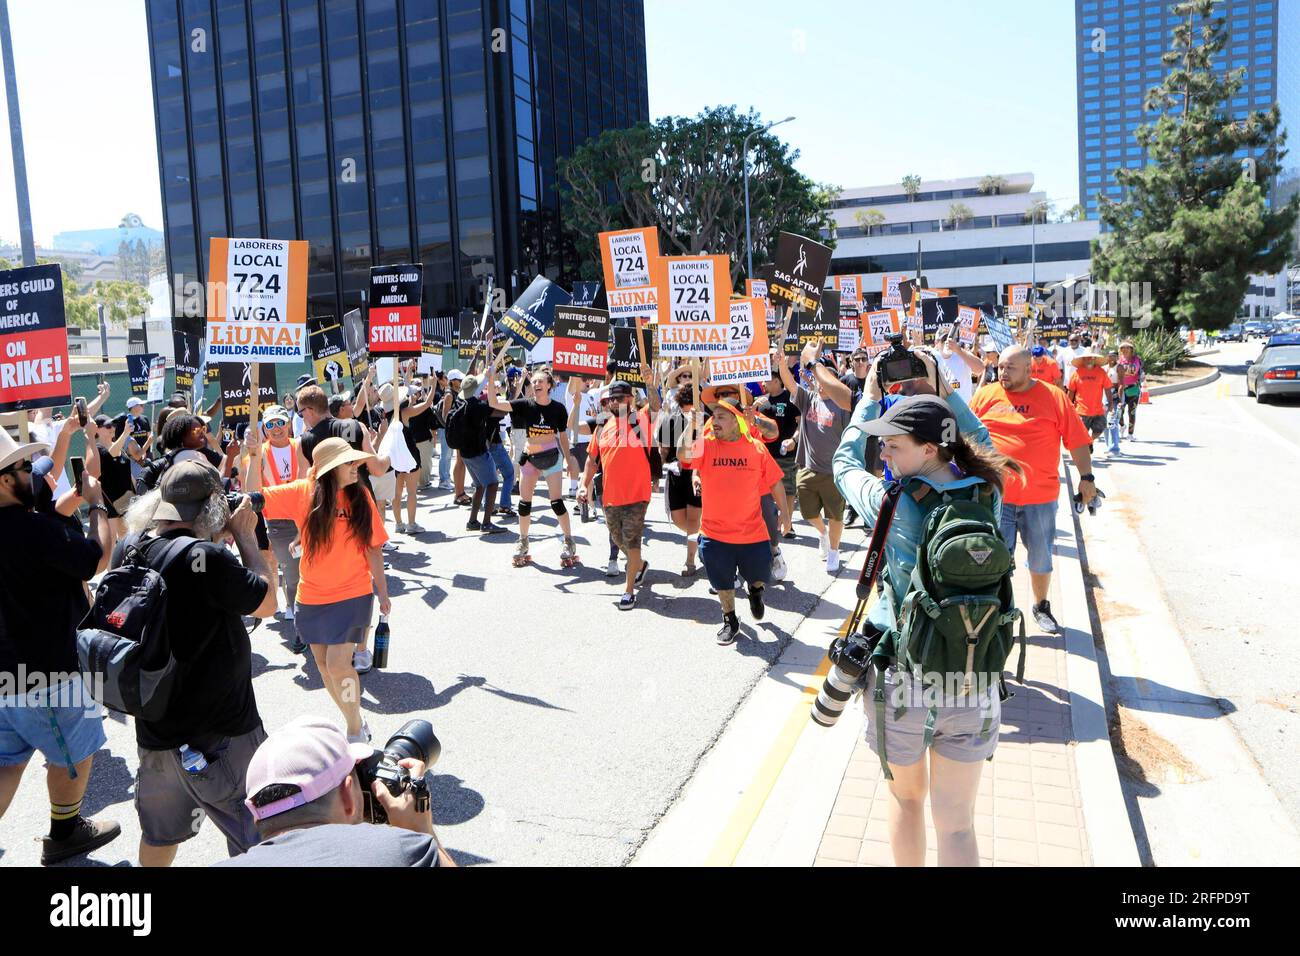 Los Angeles, CA. 4th Aug, 2023. Strikers in attendance for SAG-AFTRA and WGA Host Strikers at Picket Line Protest at Universal Studios, Universal City, Los Angeles, CA August 4, 2023. Credit: Priscilla Grant/Everett Collection/Alamy Live News Stock Photo